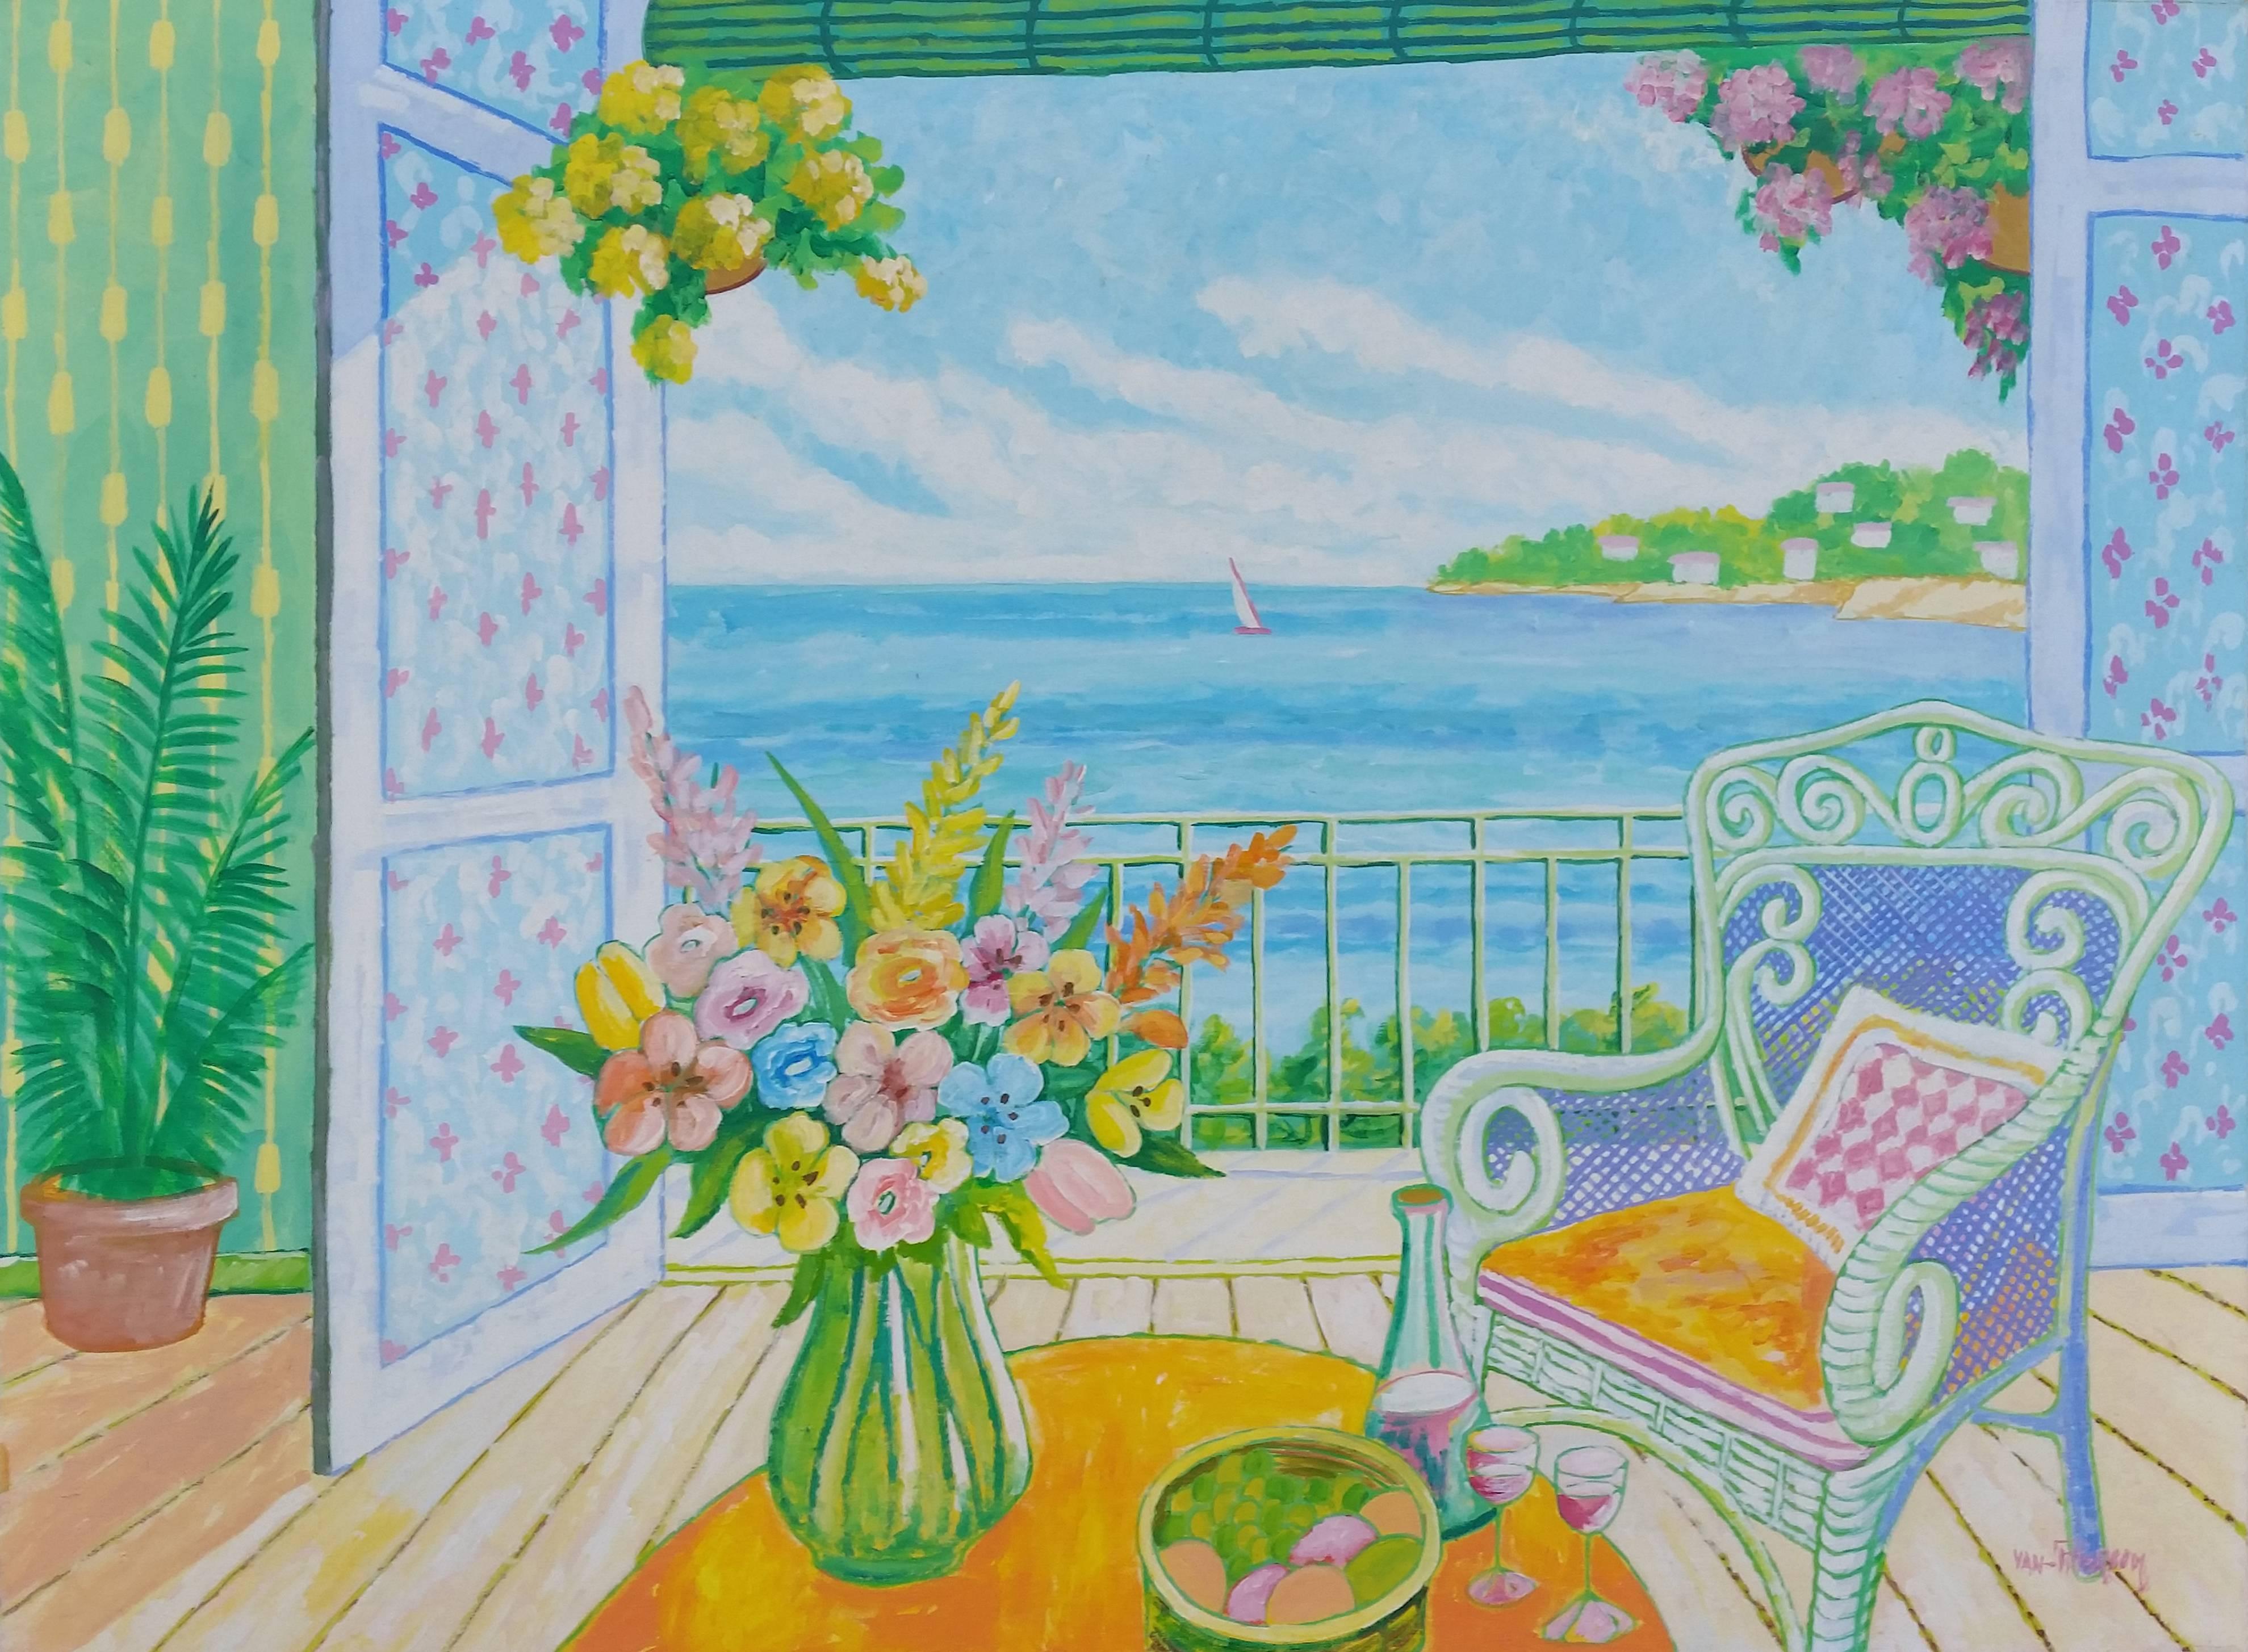 Balcony View, Oil Painting by Lloyd van Pitterson